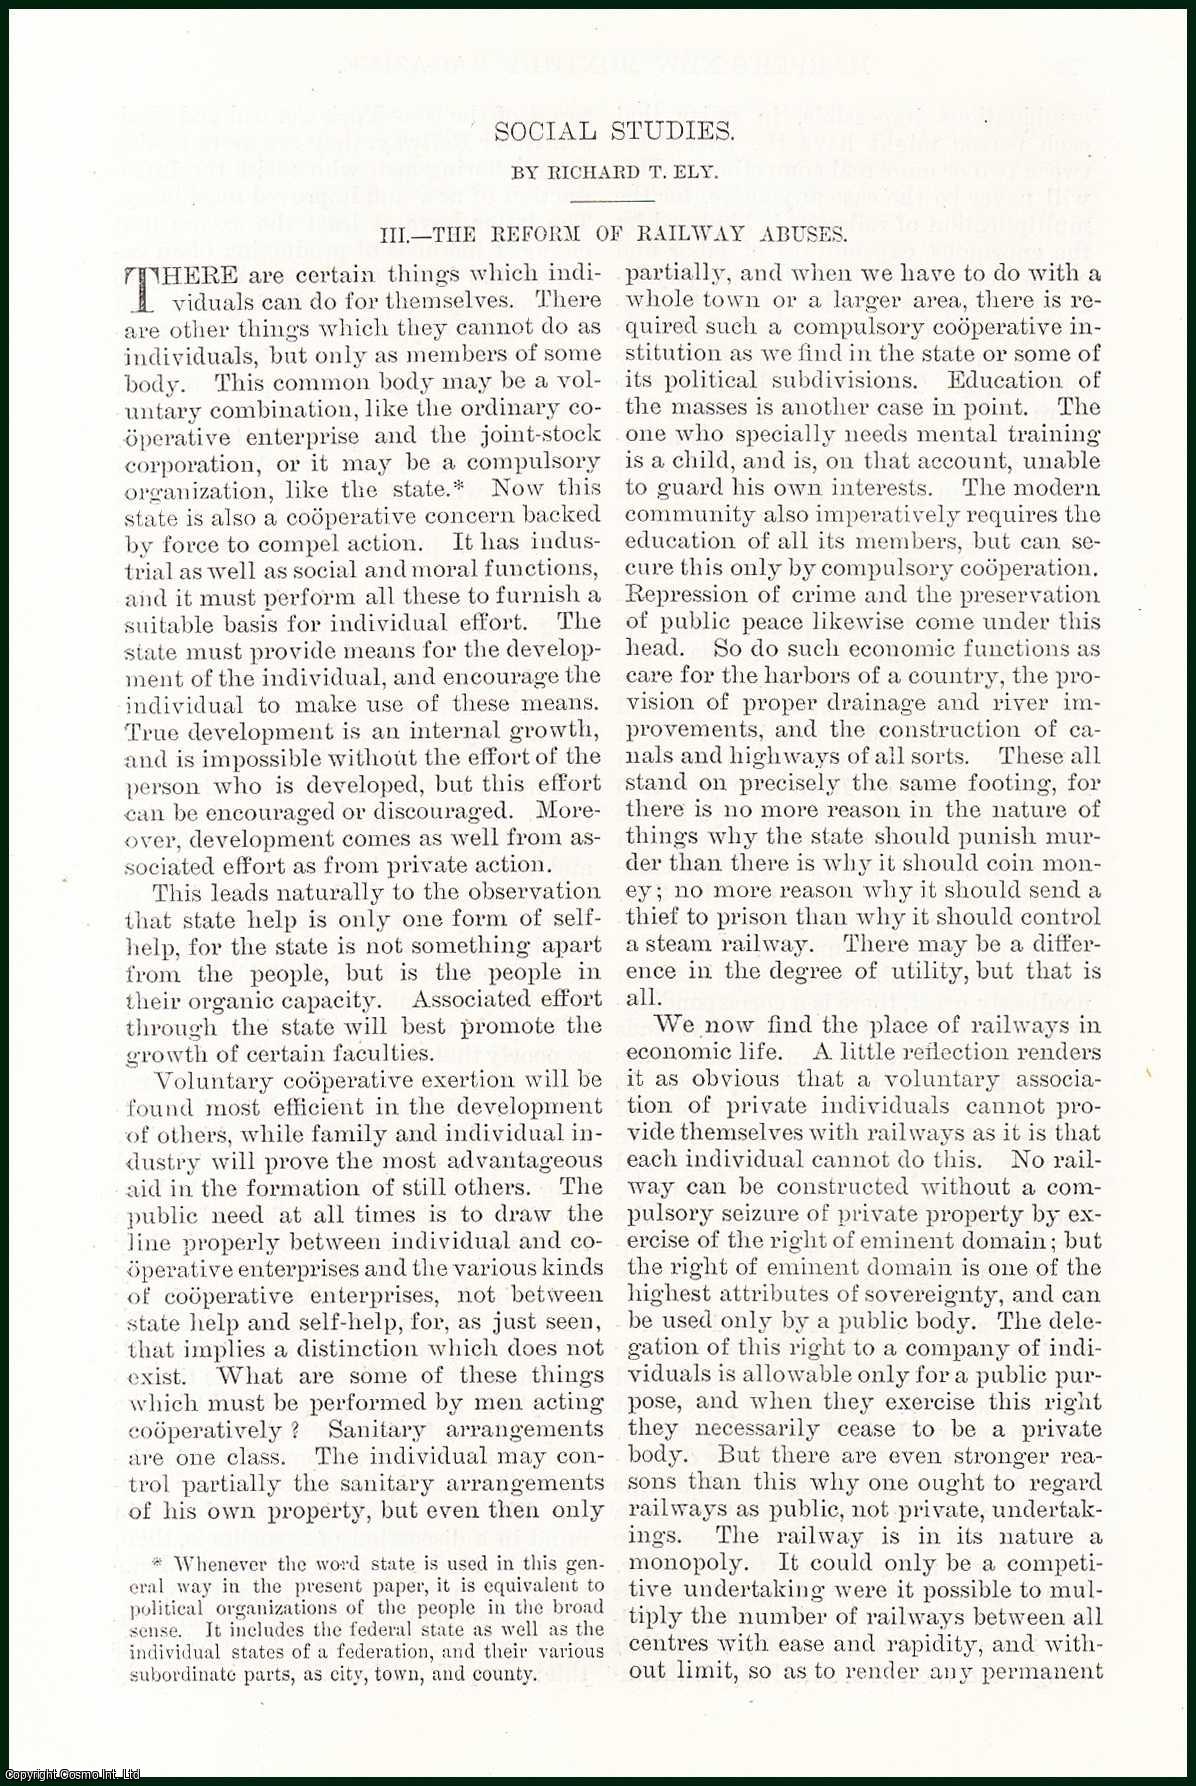 Richard T. Ely - The Reform of Railway Abuses : Social Studies. An uncommon original article from the Harper's Monthly Magazine, 1886.